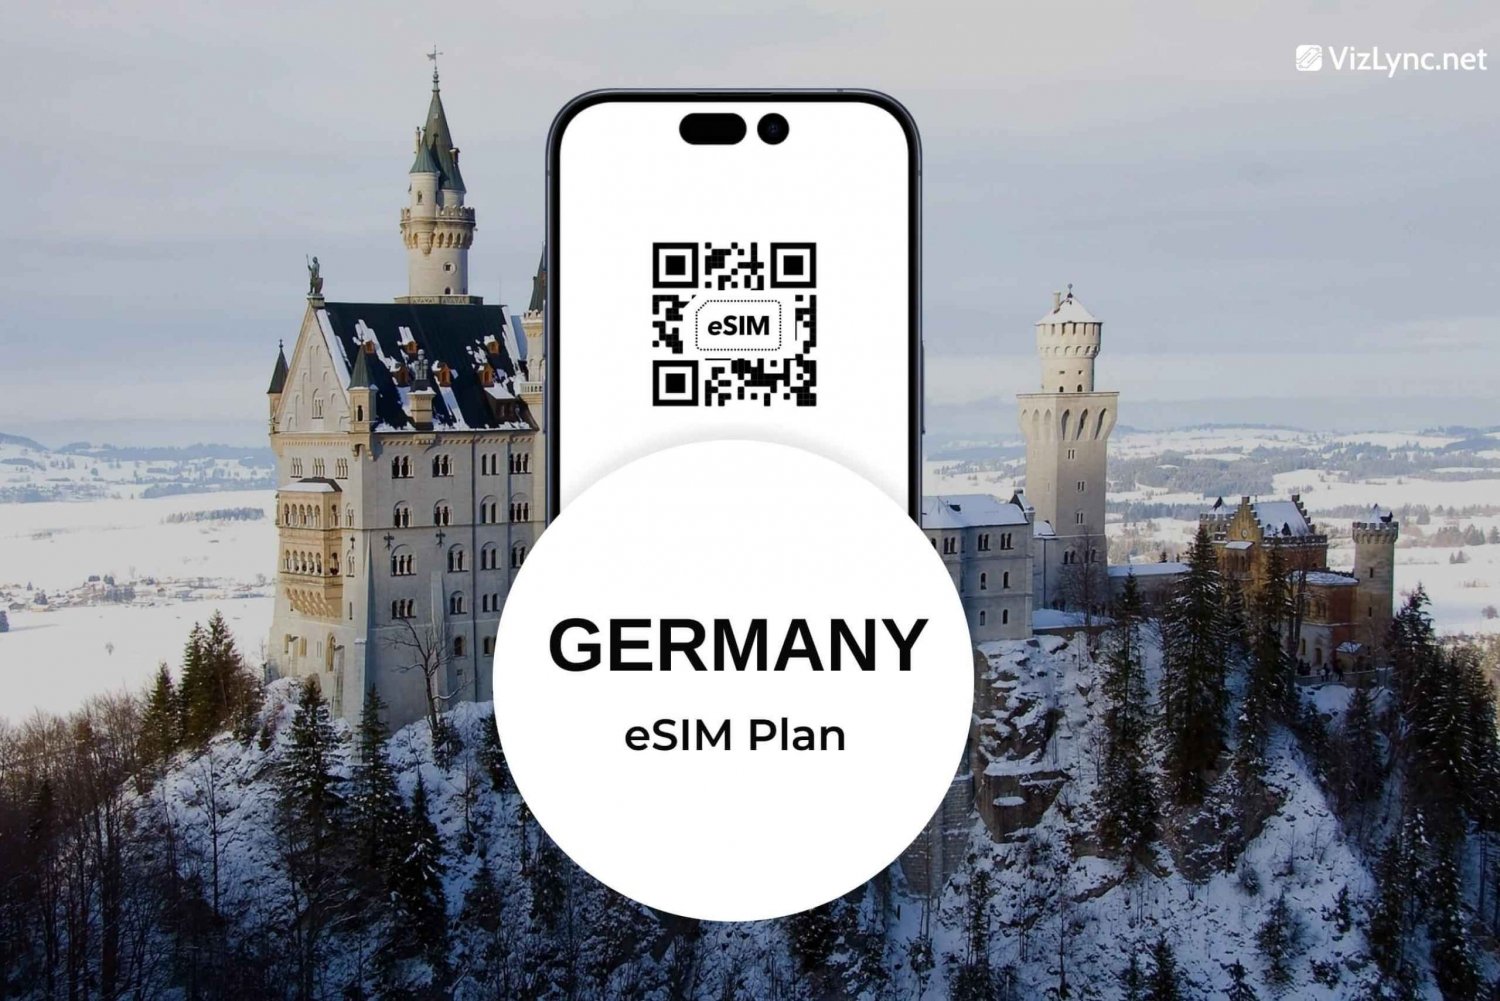 Germany eSIM Data plans with Super fast Mobile Data Options